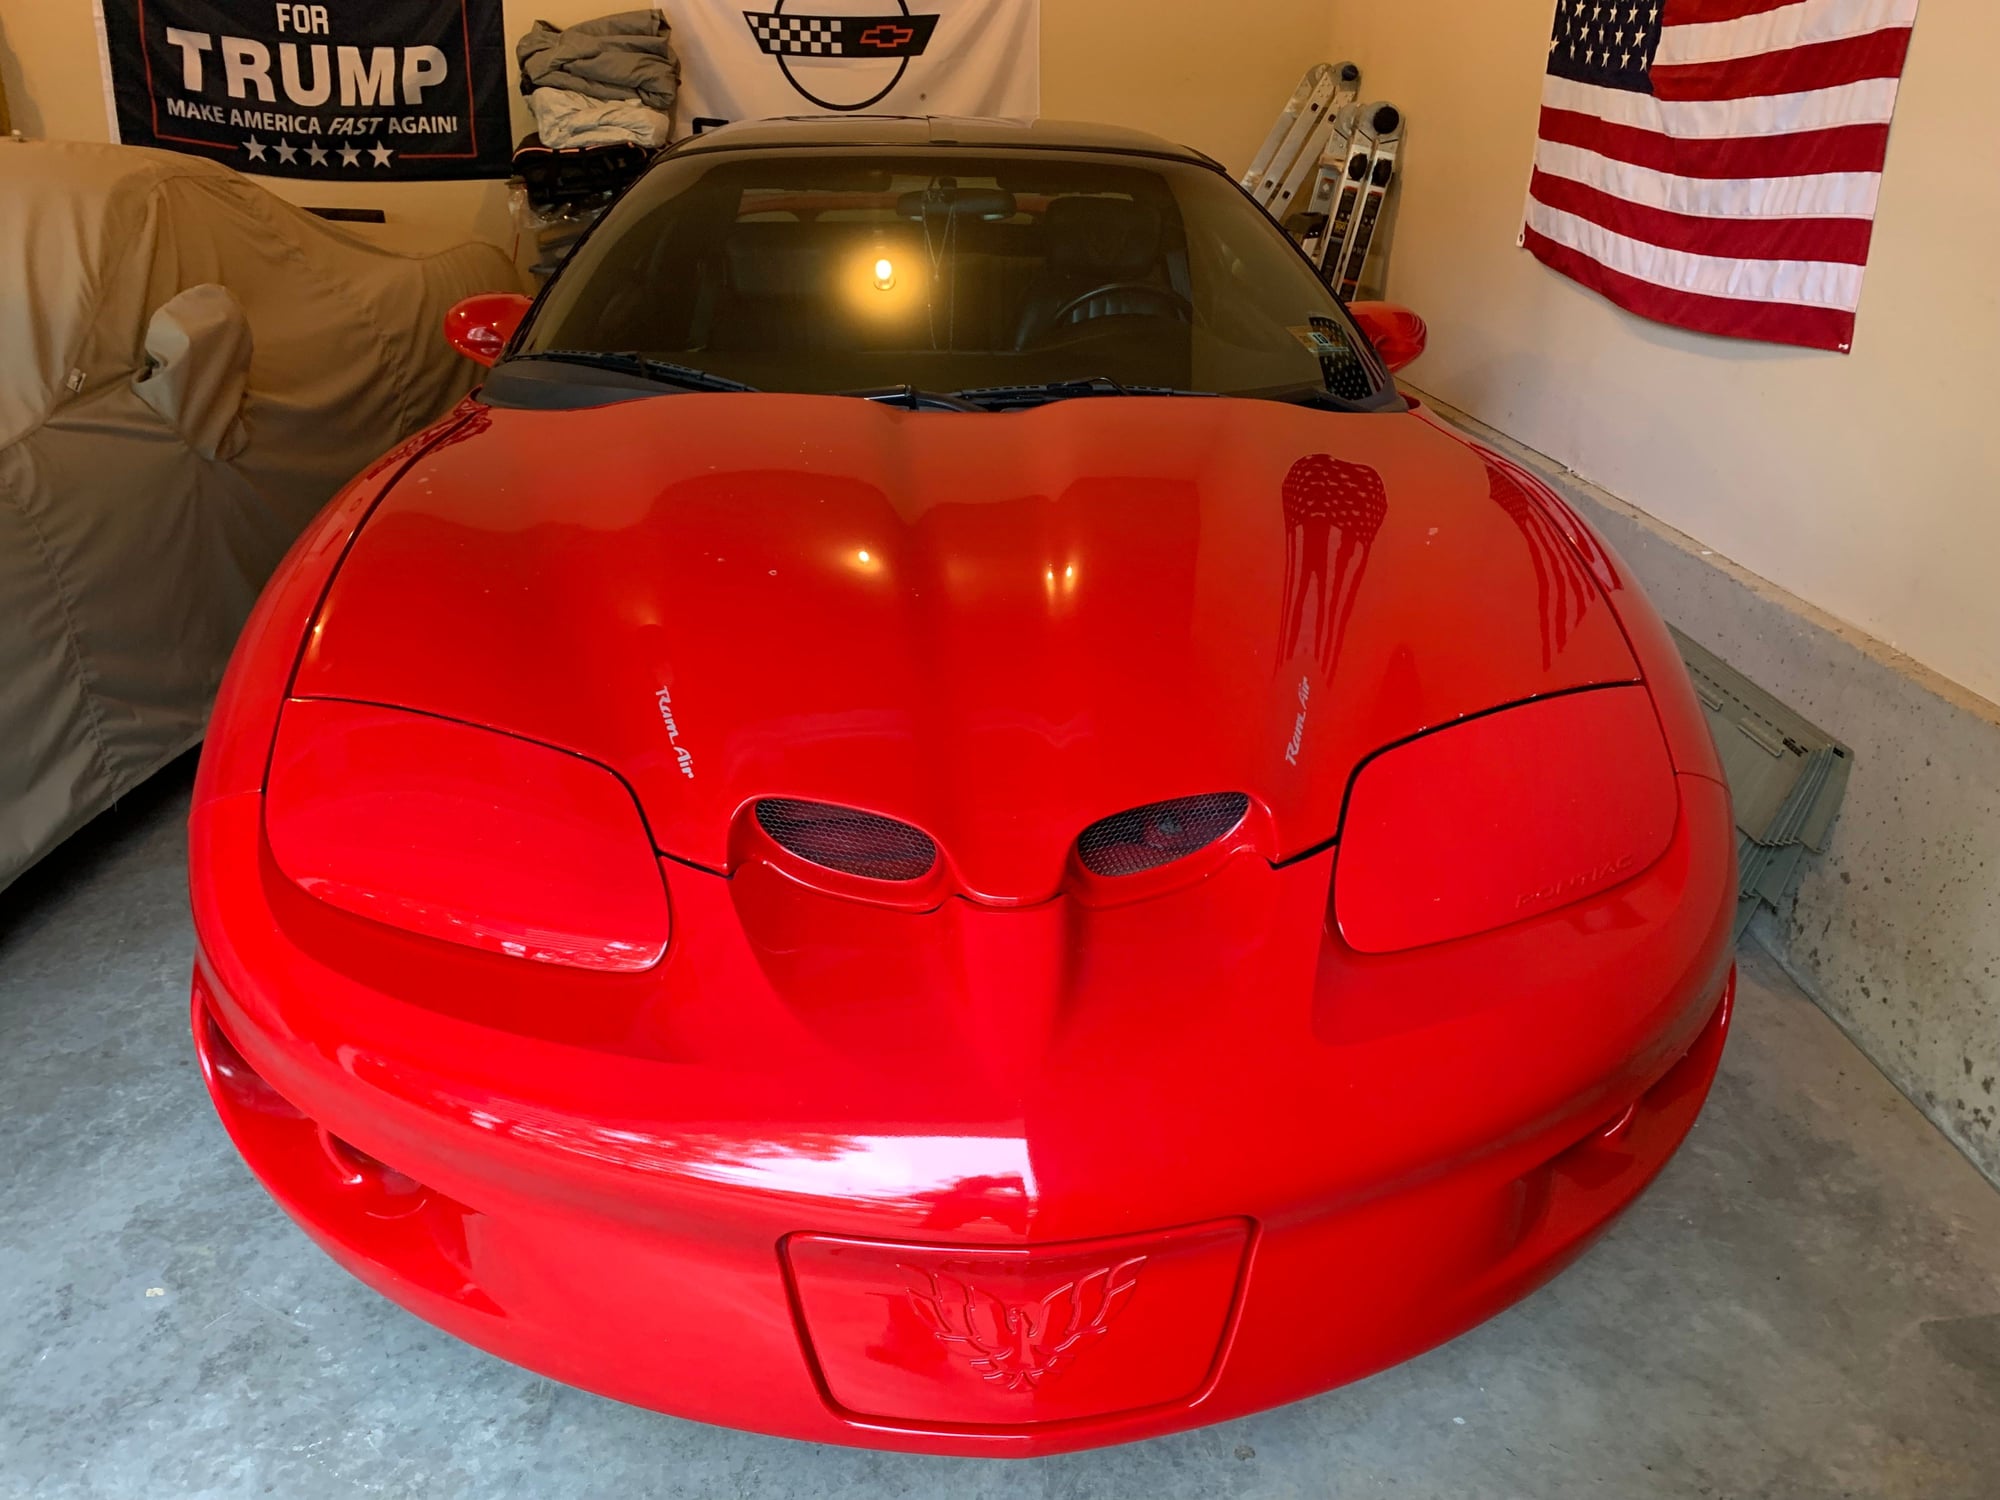 2001 Pontiac Firebird - 2001 Firebird Formula - Used - VIN 2G2FV22G312137925 - 64,000 Miles - 8 cyl - 2WD - Automatic - Coupe - Red - Hazle Township, PA 18202, United States